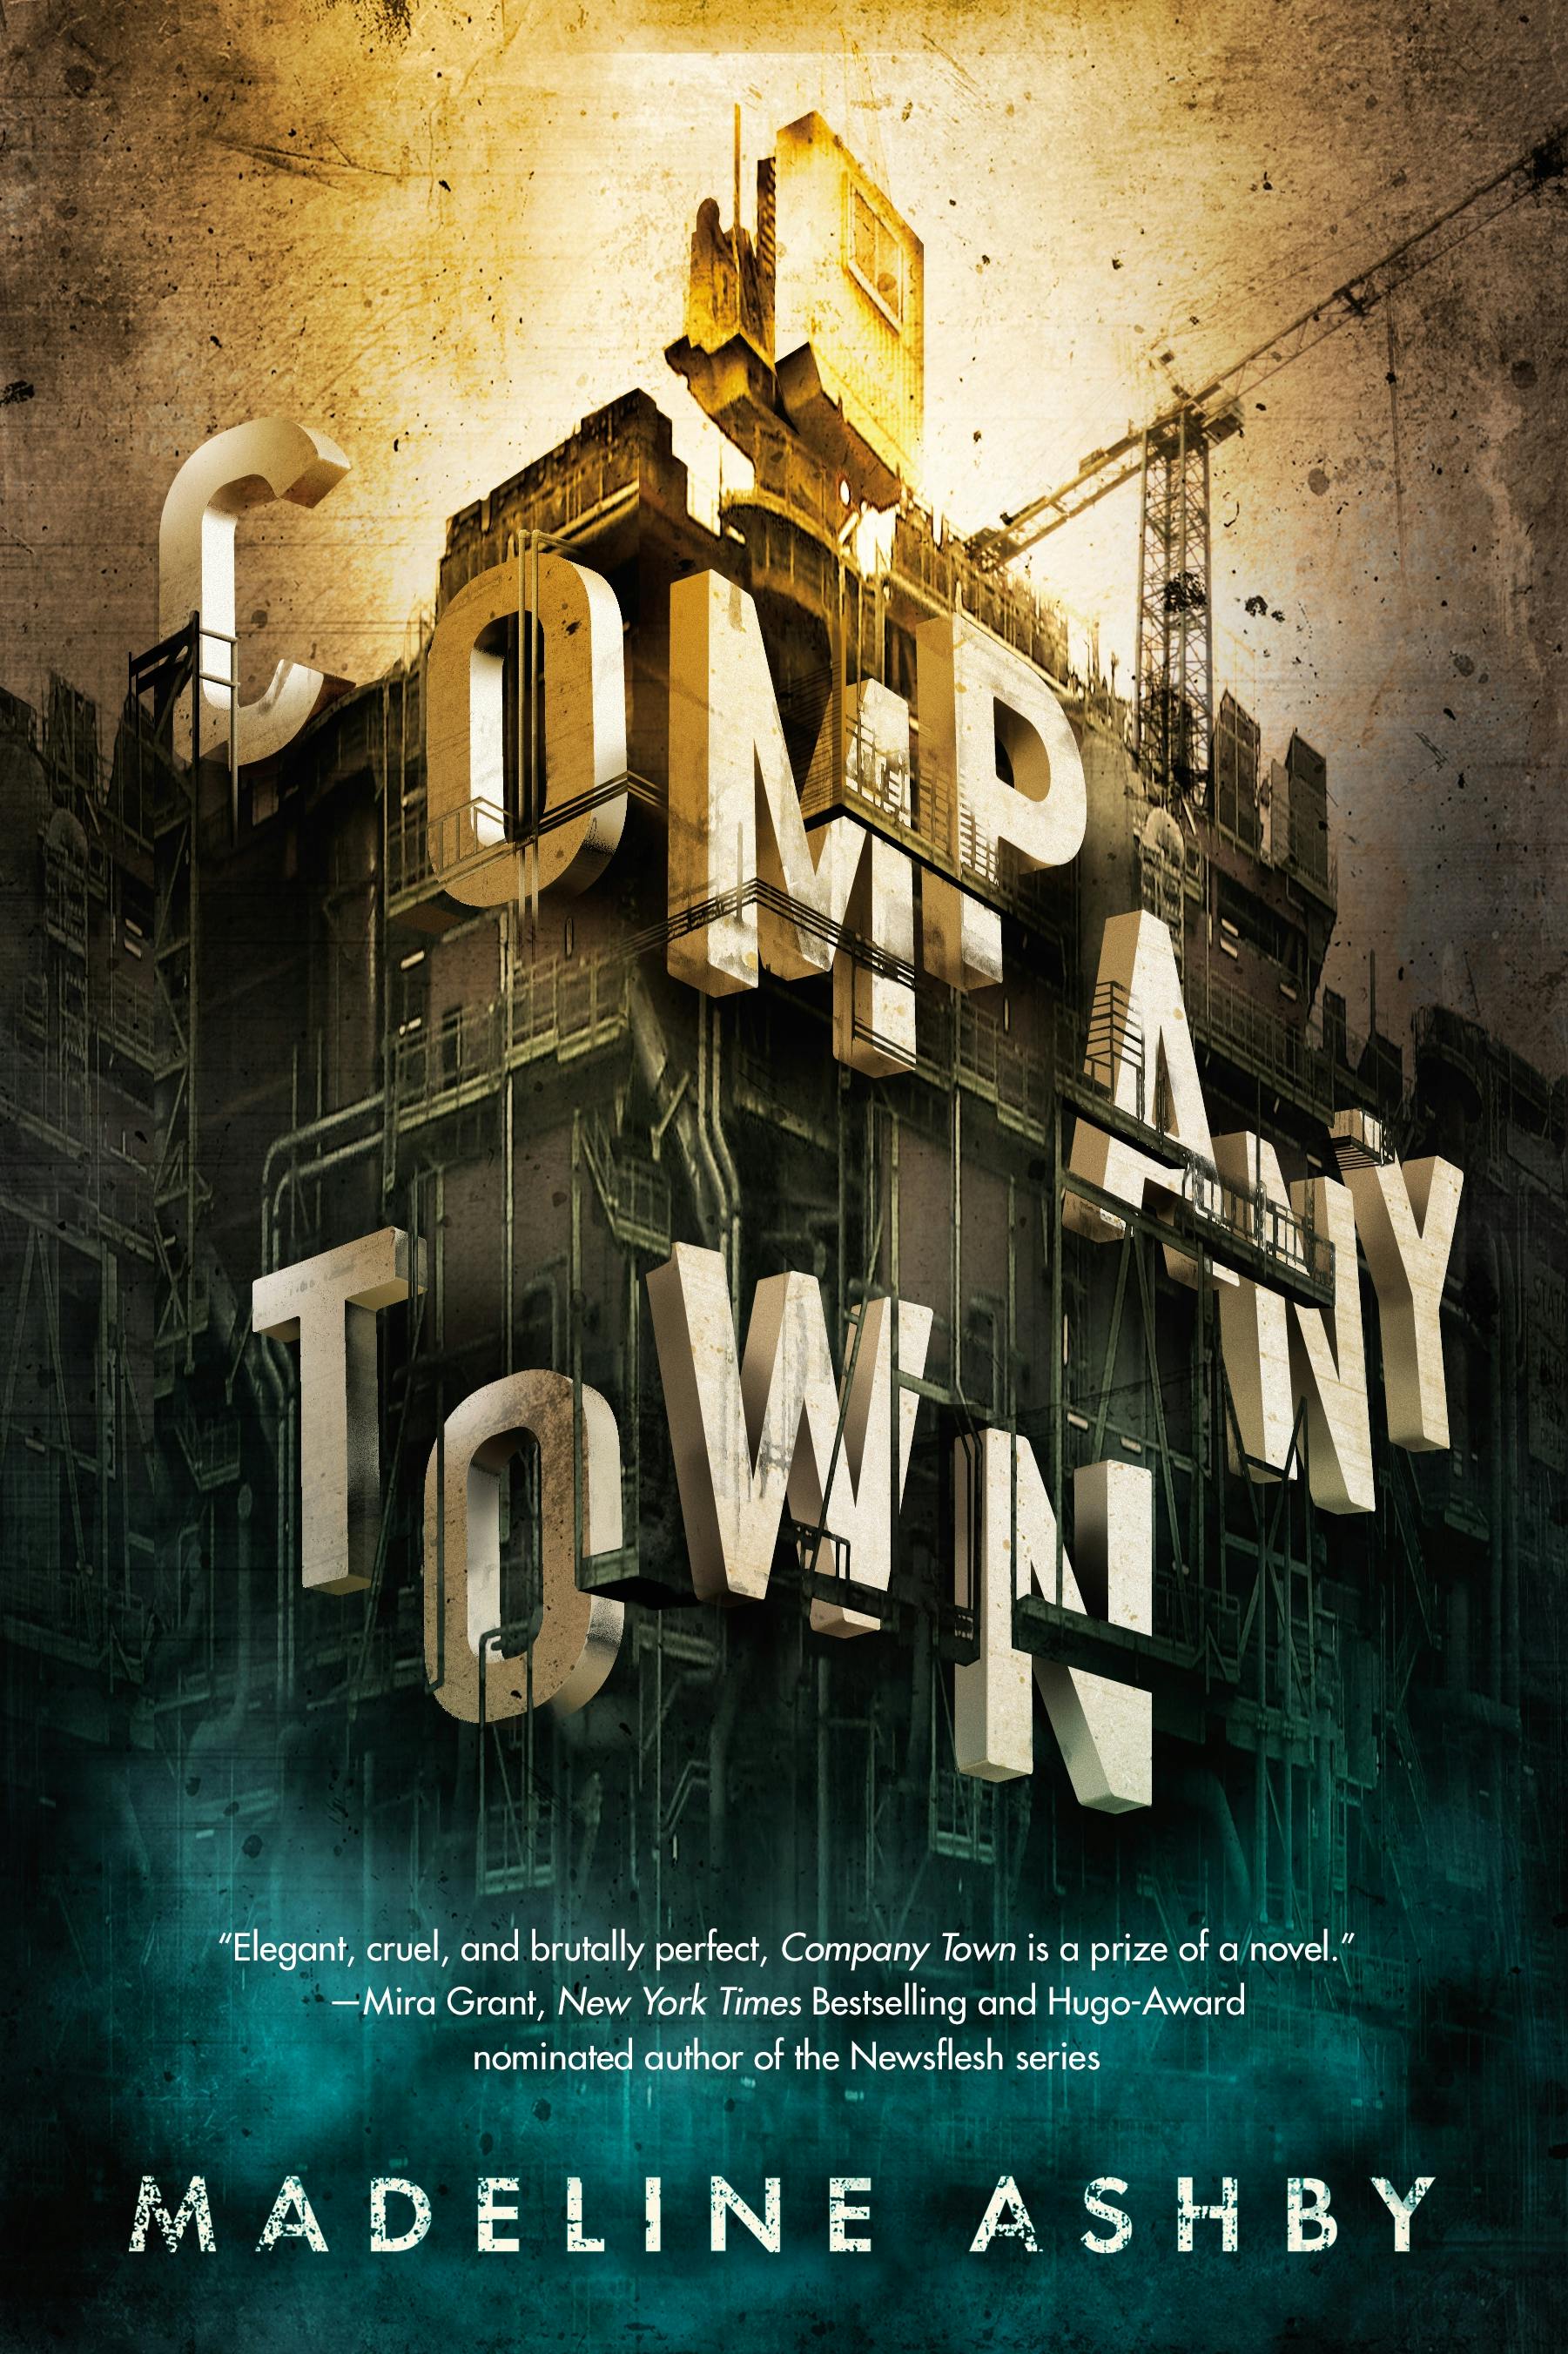 Cover for the book titled as: Company Town